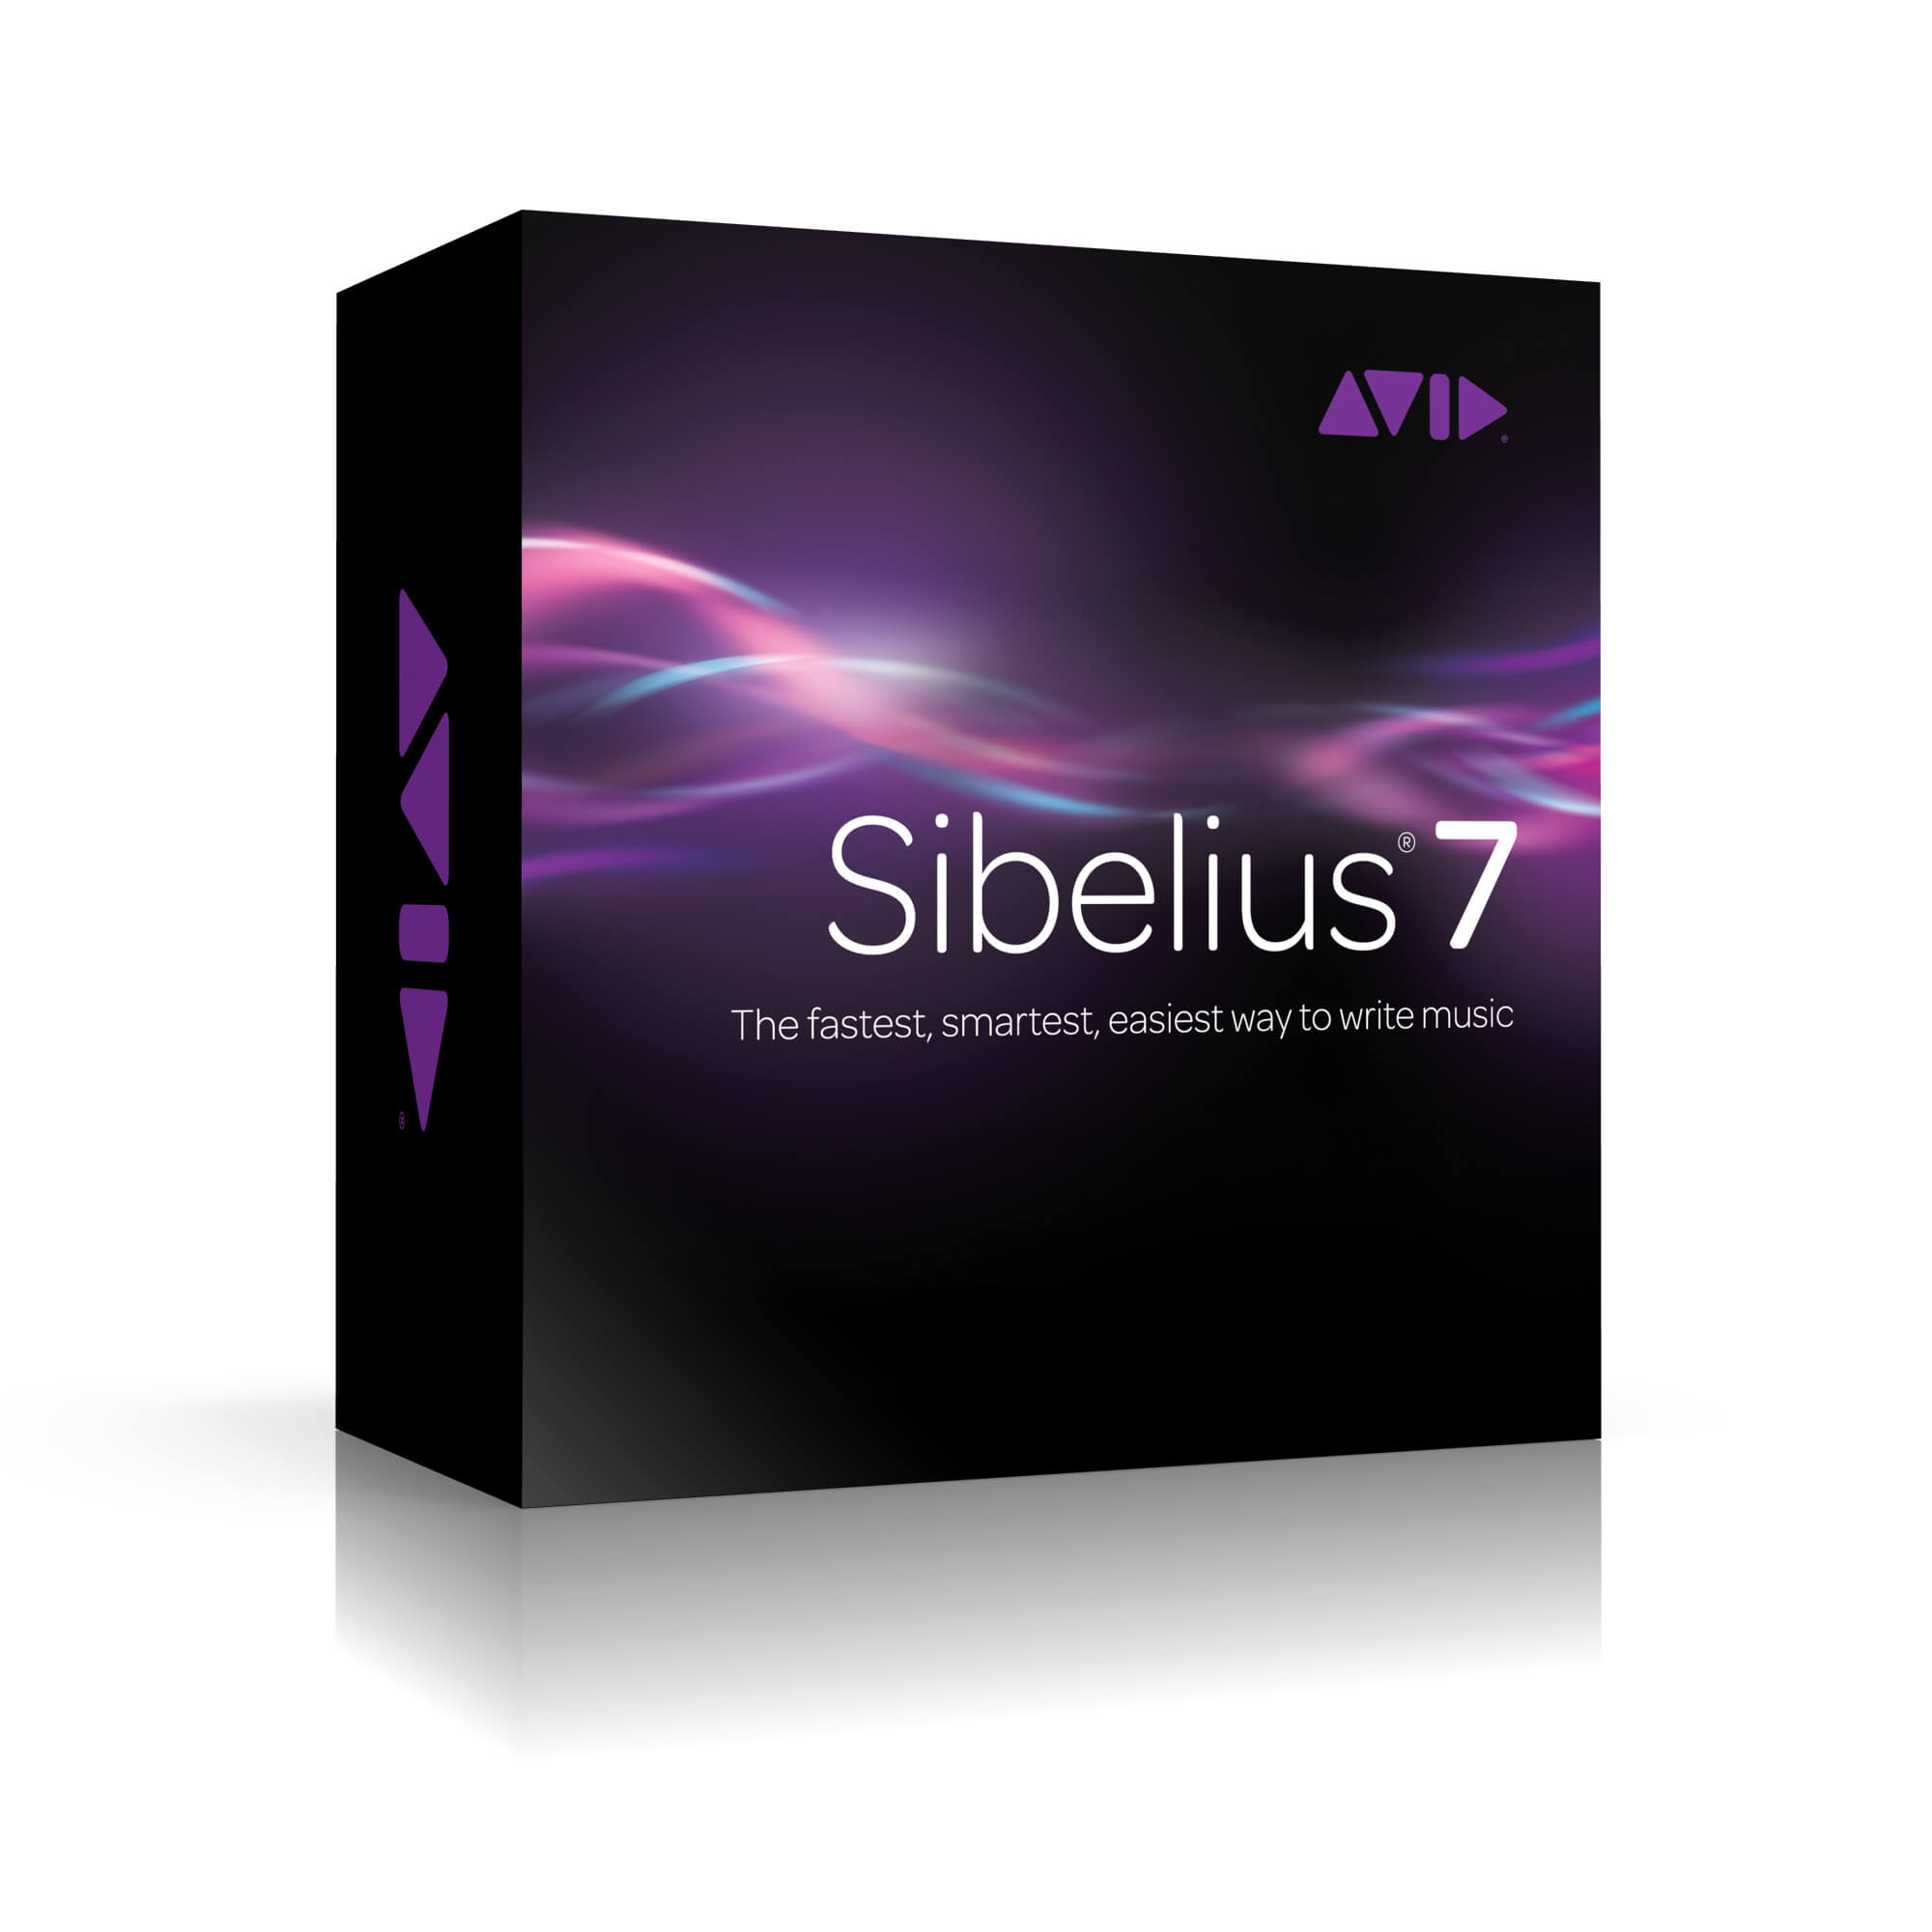 Sibelius 7 is out!